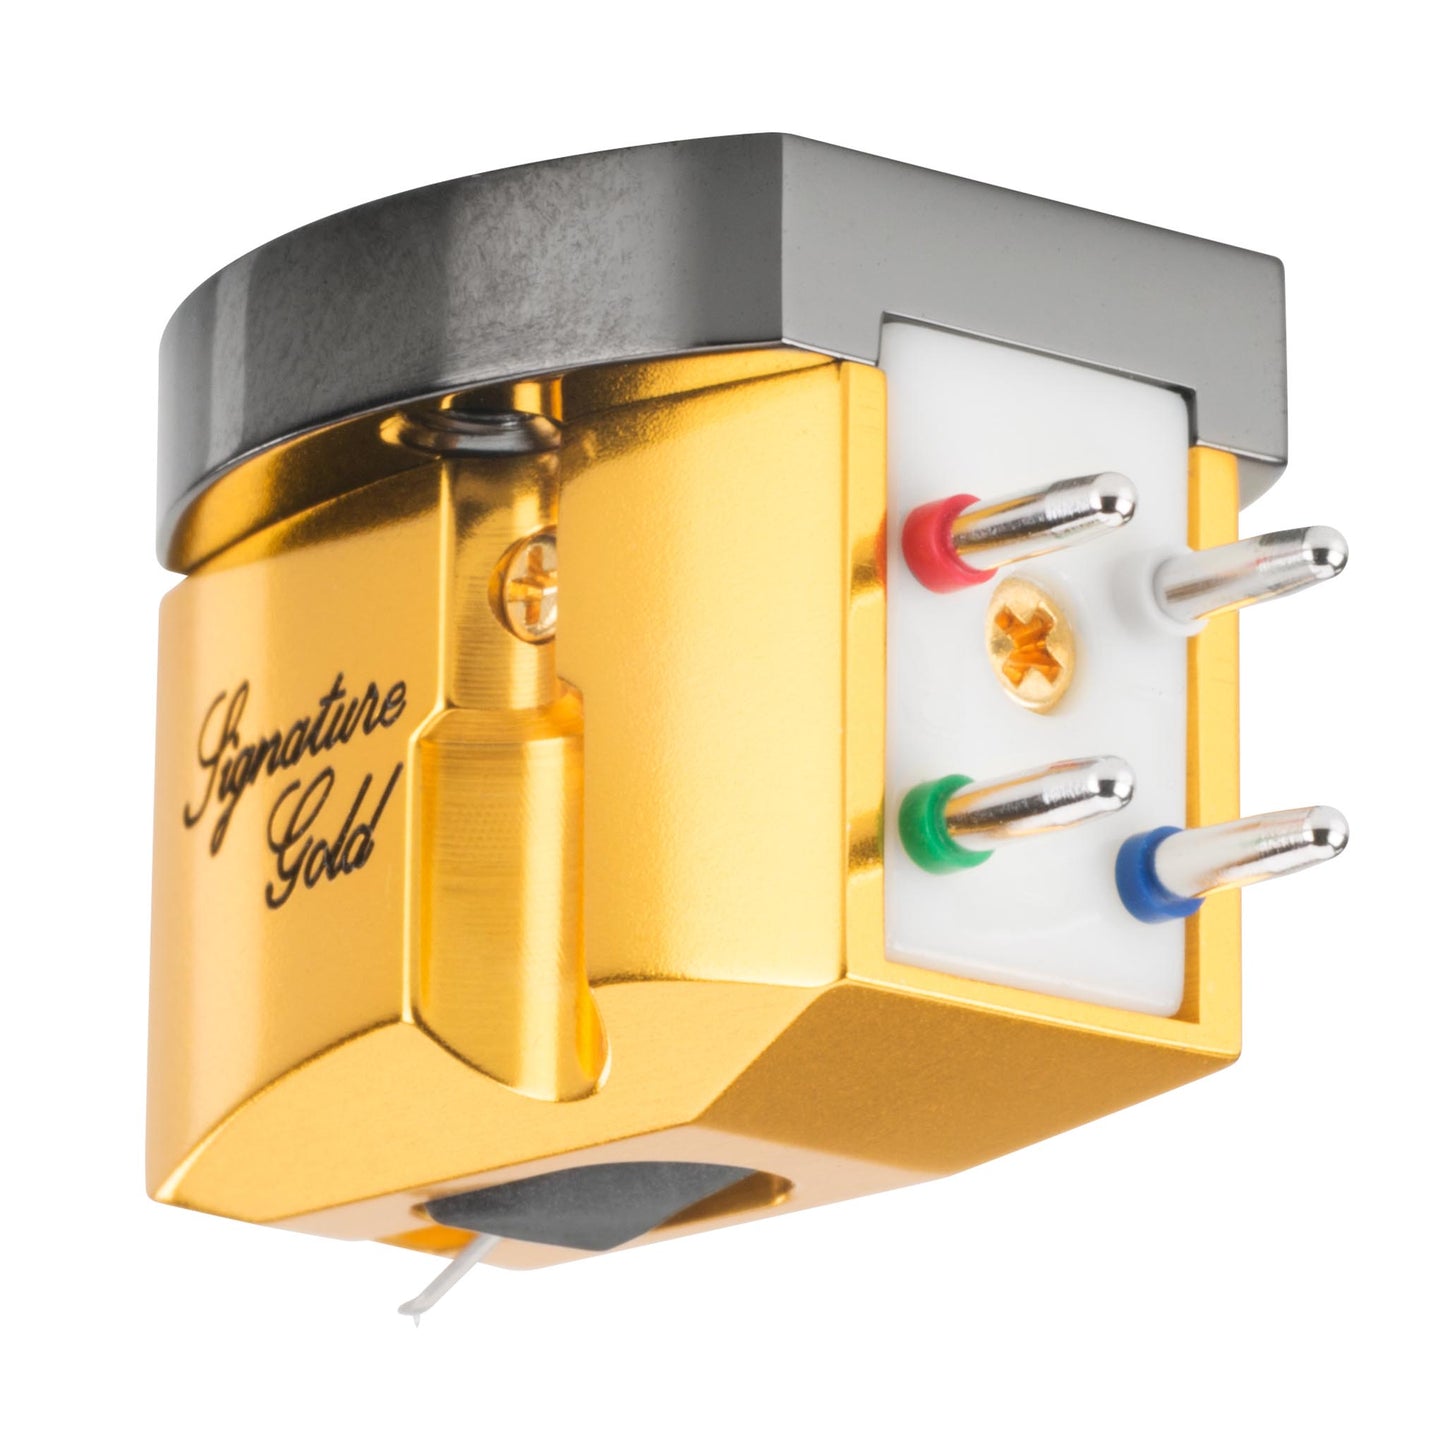 My Sonic Lab Signature Gold Moving Coil Cartridge